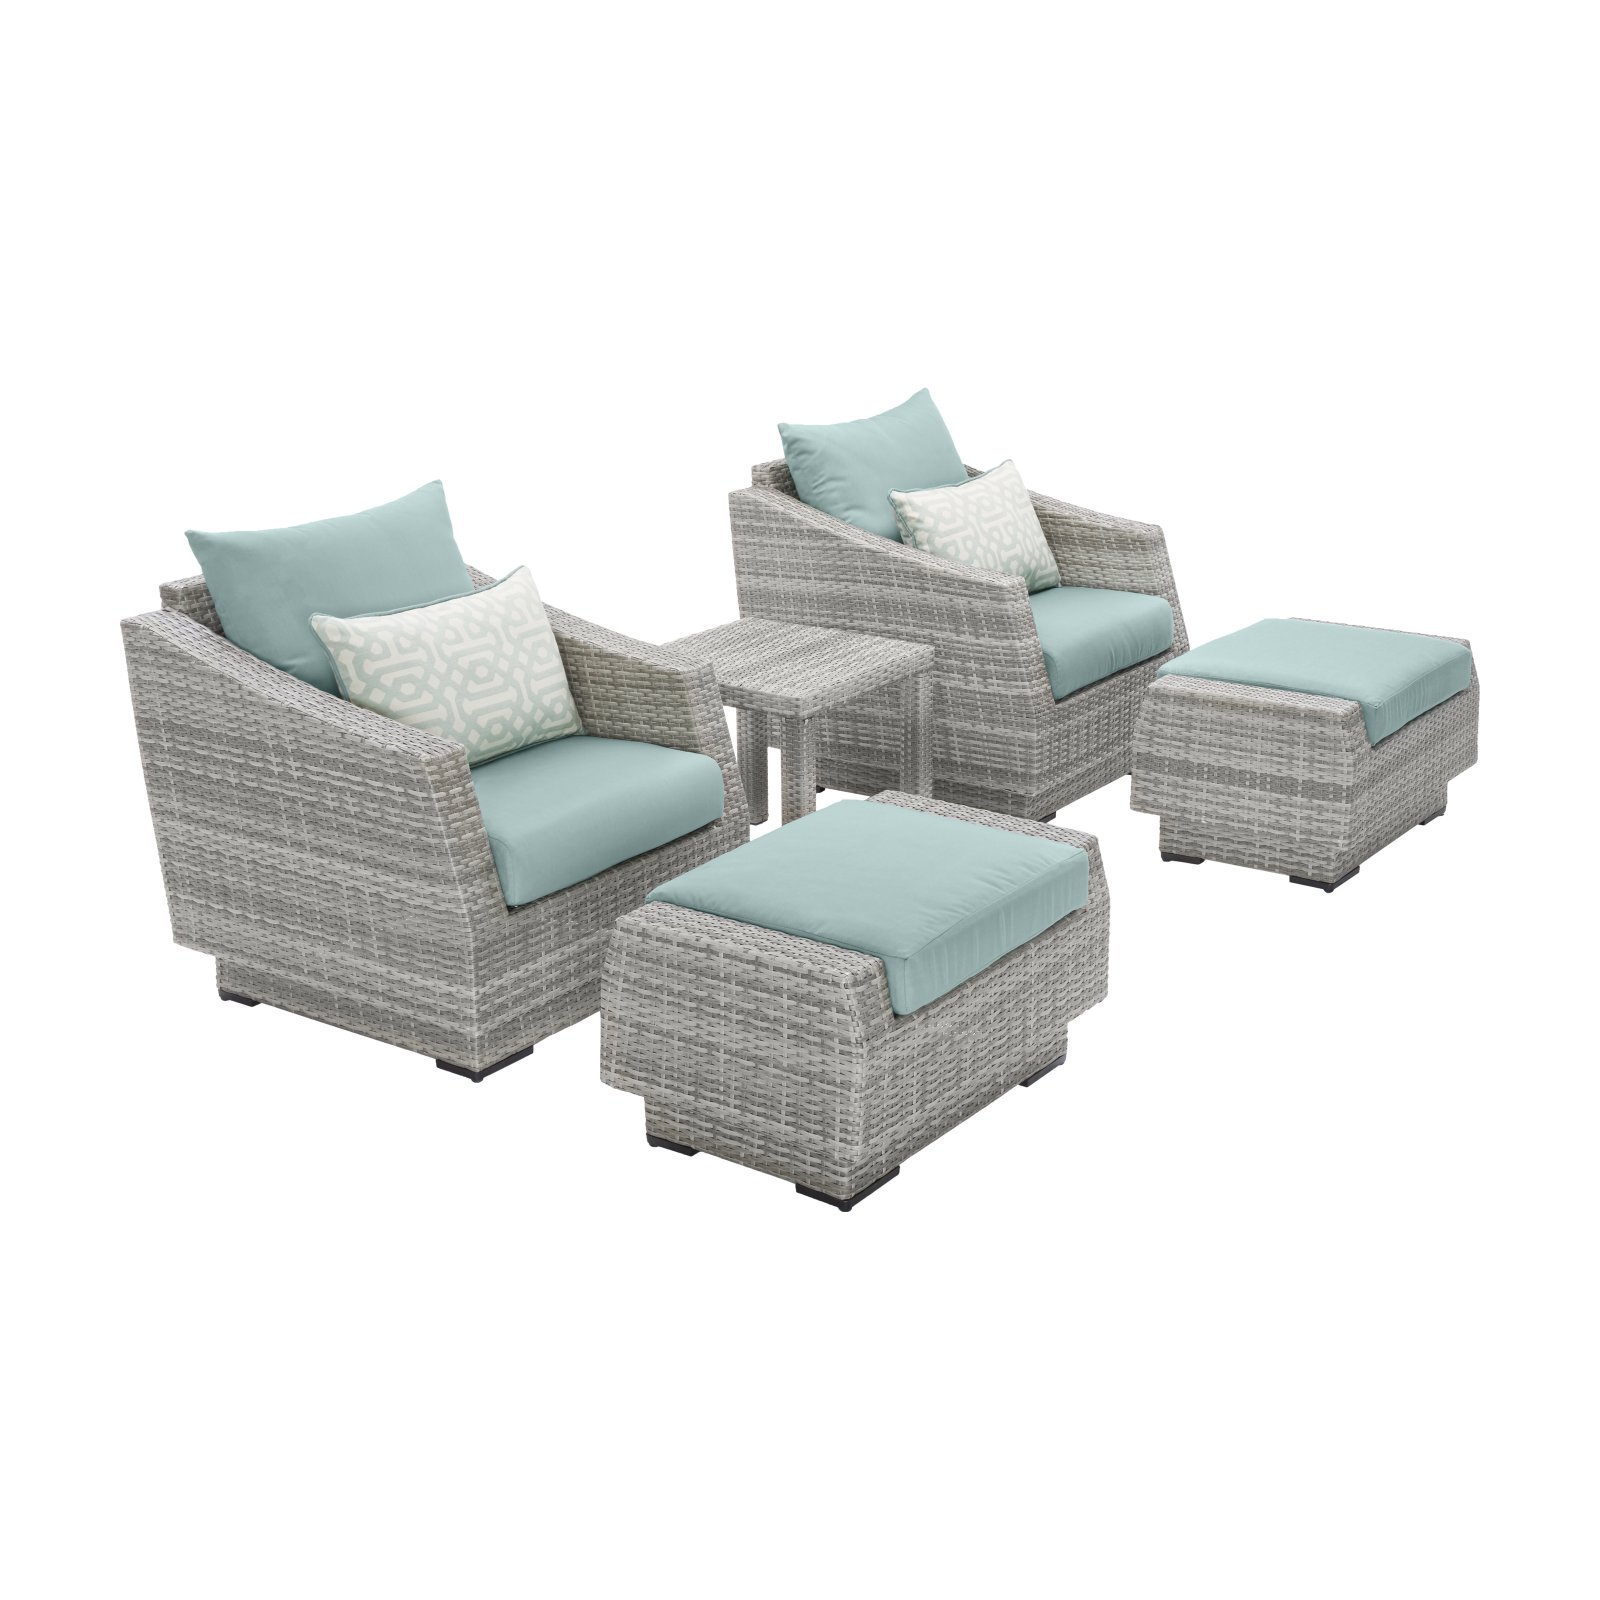 RST Brands Cannes Resin Wicker 5 Piece Patio Conversation Set - image 1 of 11